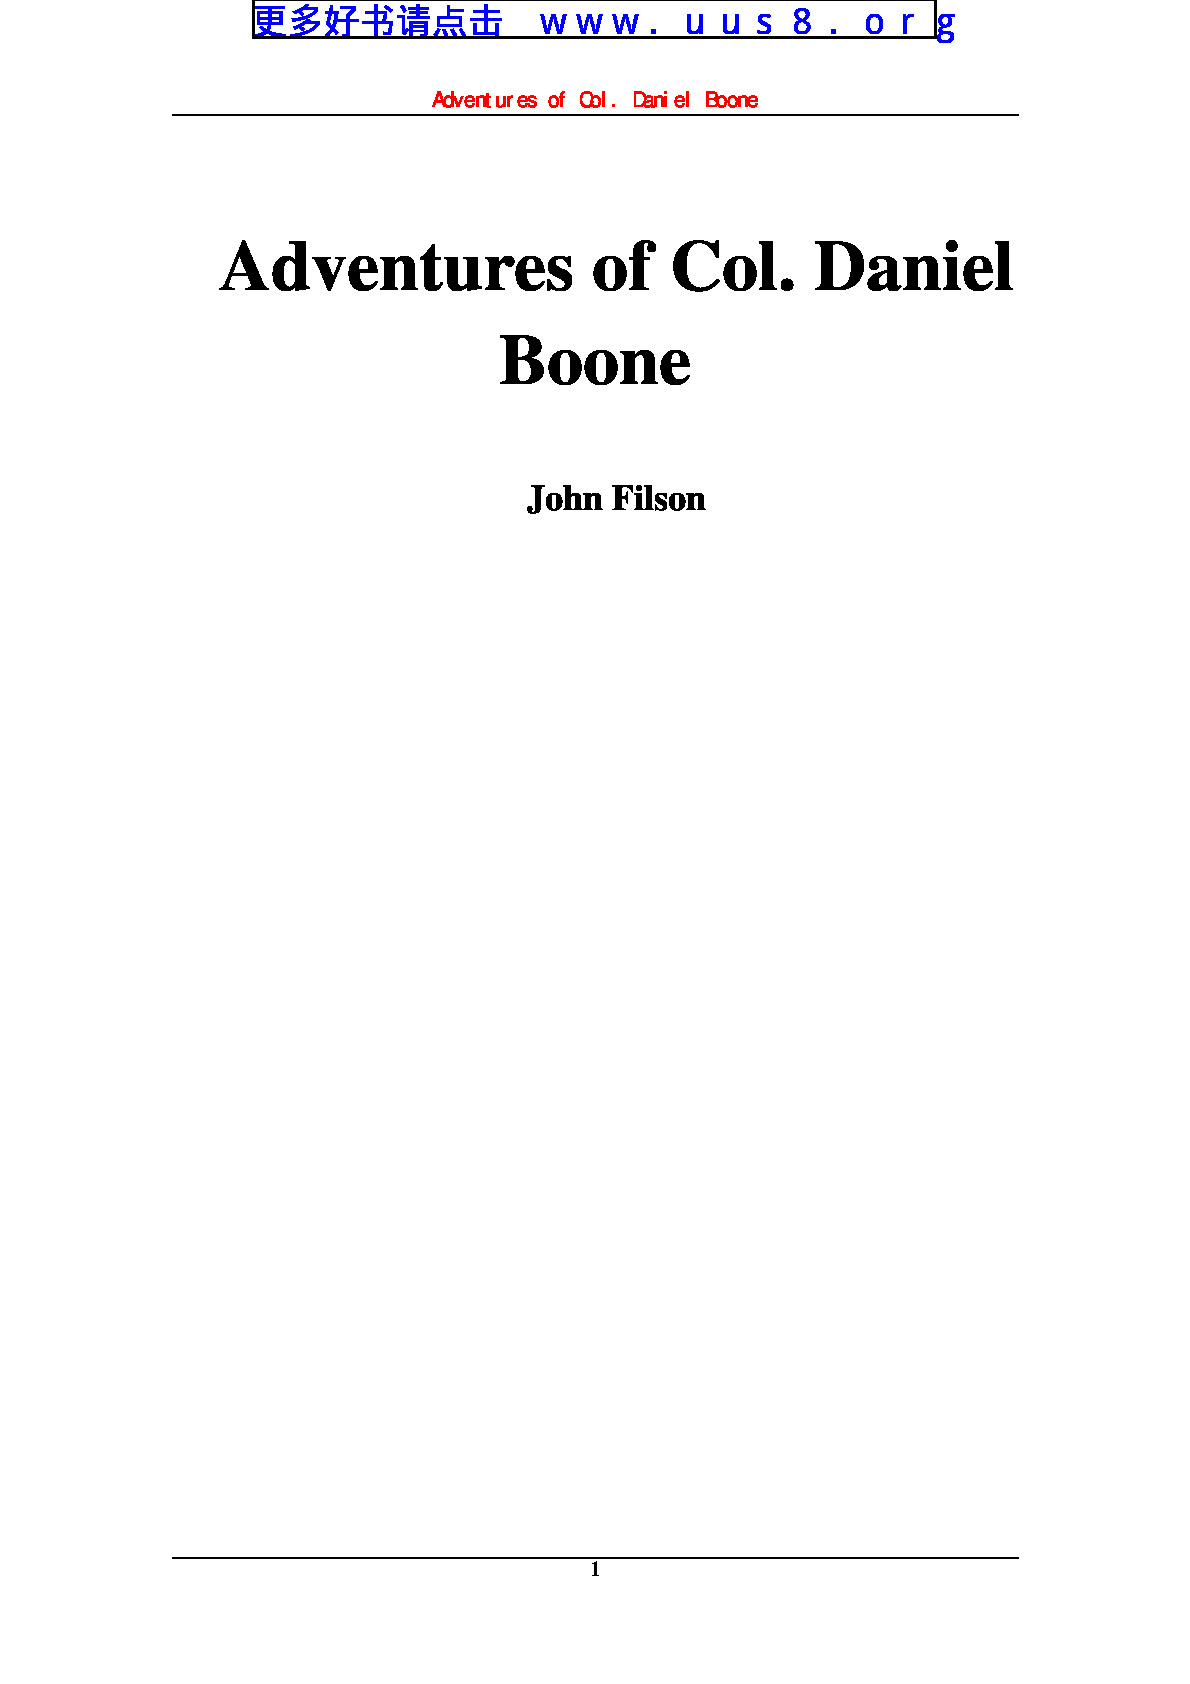 adventures_of_col